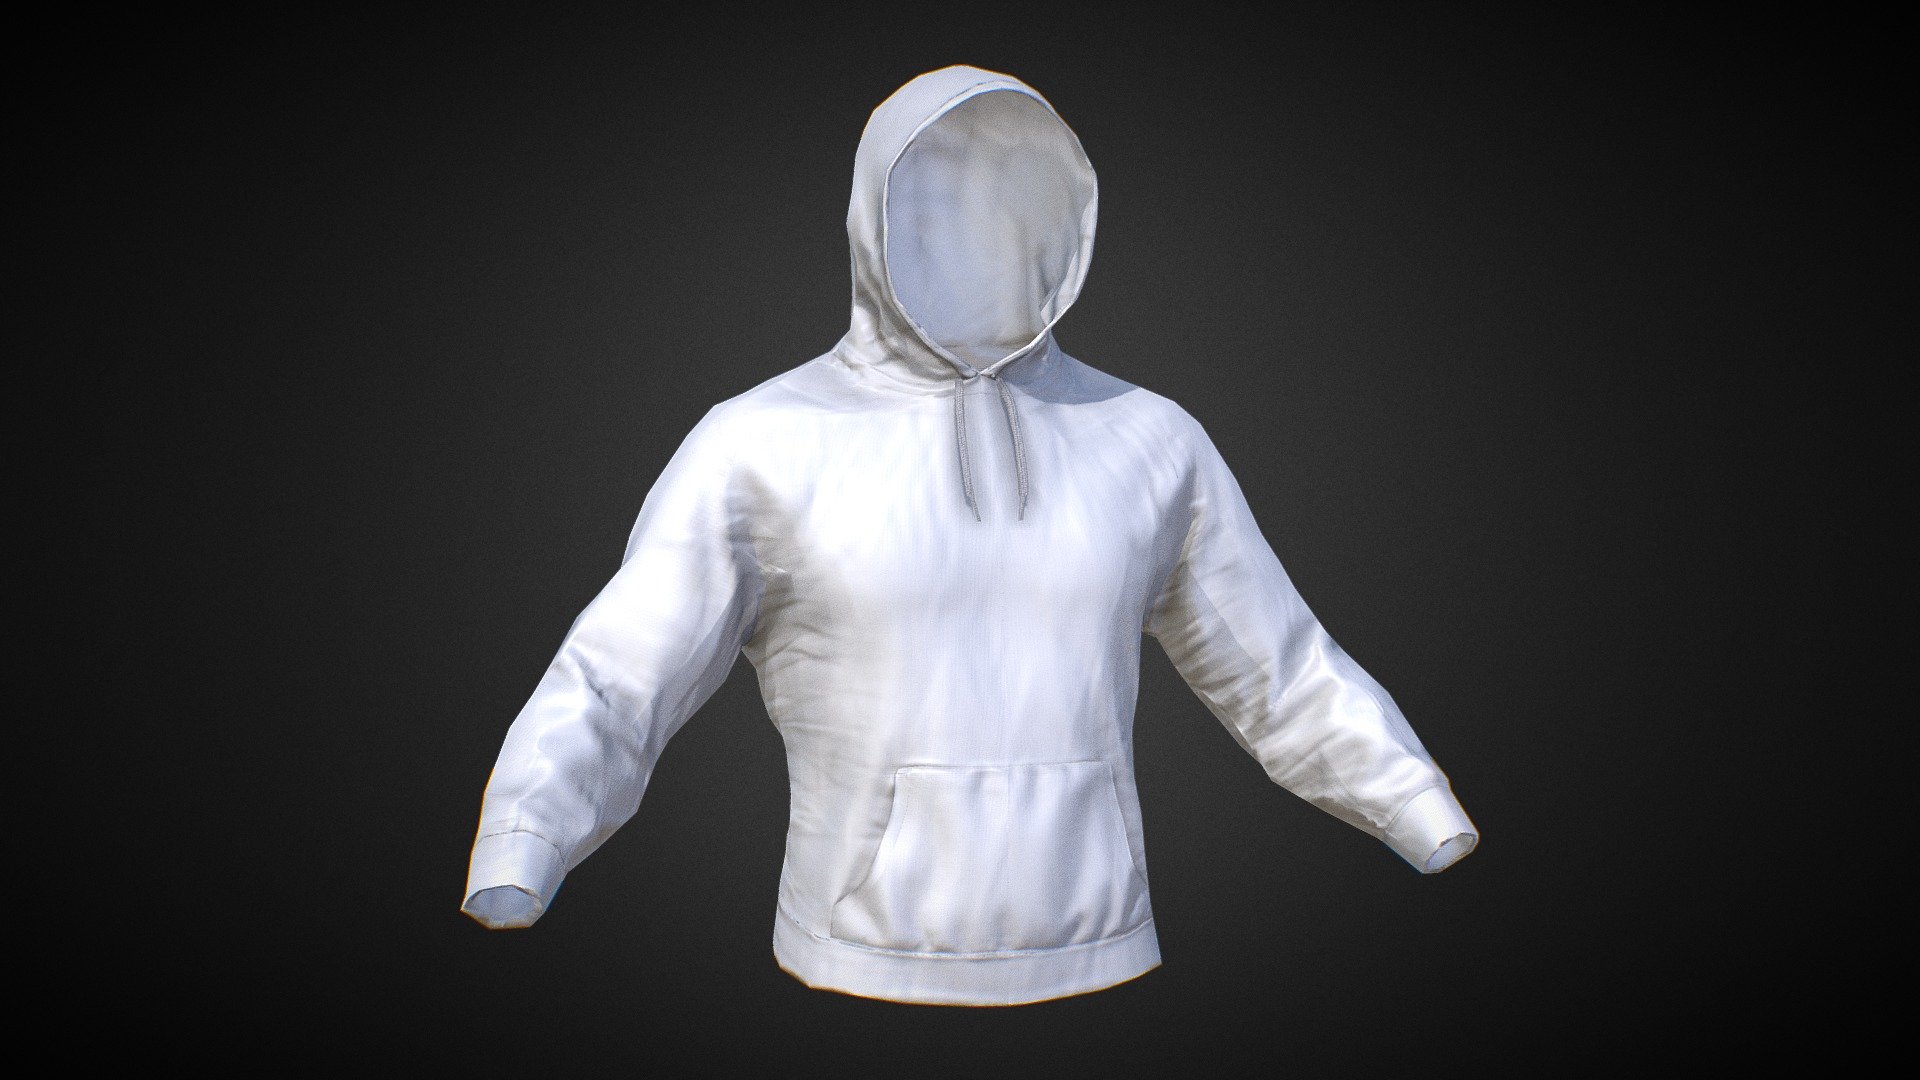 Made in Blender &amp; Substance Painter. Fitted and Rigged to the standard male metahuman.

Links to social media and support: https://linktr.ee/tikodev

Get exclusive models and support me: patreon.com/tiko - Hoodie (Metahuman Ready) - Buy Royalty Free 3D model by Tiko (@tikoavp) 3d model